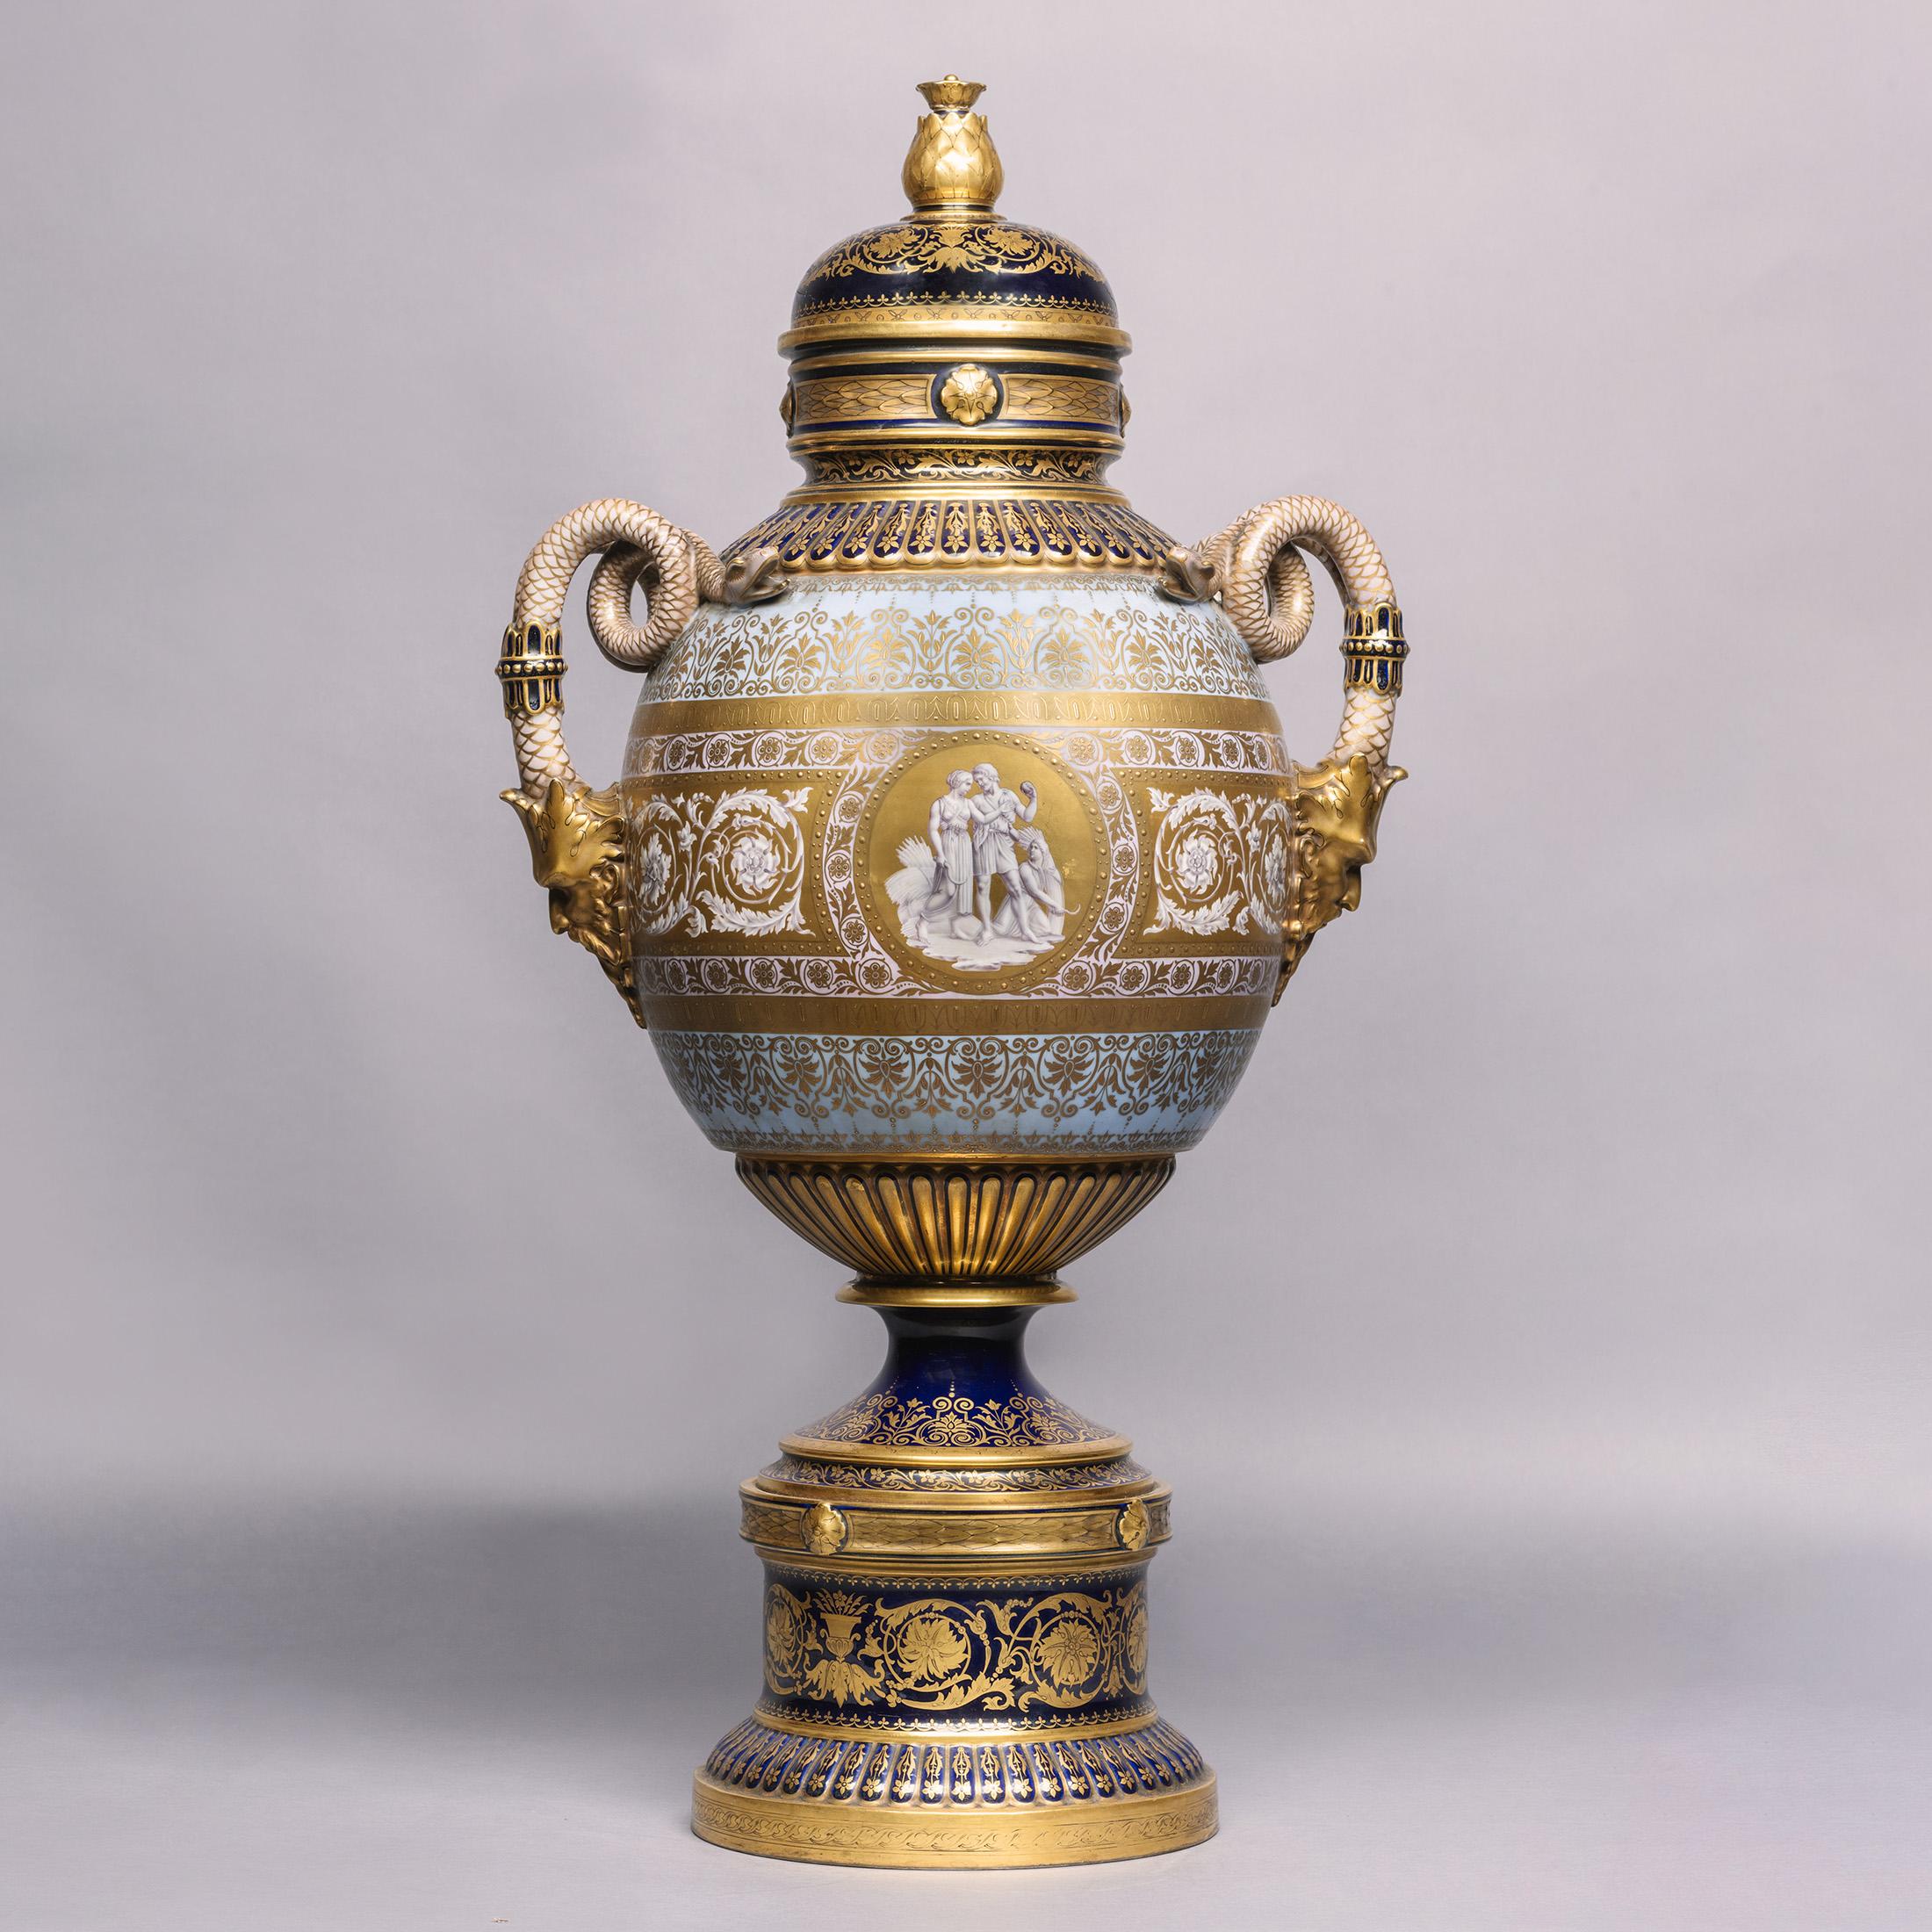 A fine Vienna style porcelain vase and cover by Fischer & Mieg, Pirkenhammer, with a Painted Reserve of ‘An Allegory of Love’ After Titian, By Franz Wagner.

The underside of each vase with an underglaze Pirkenhammer shield mark for 1887 -1890.